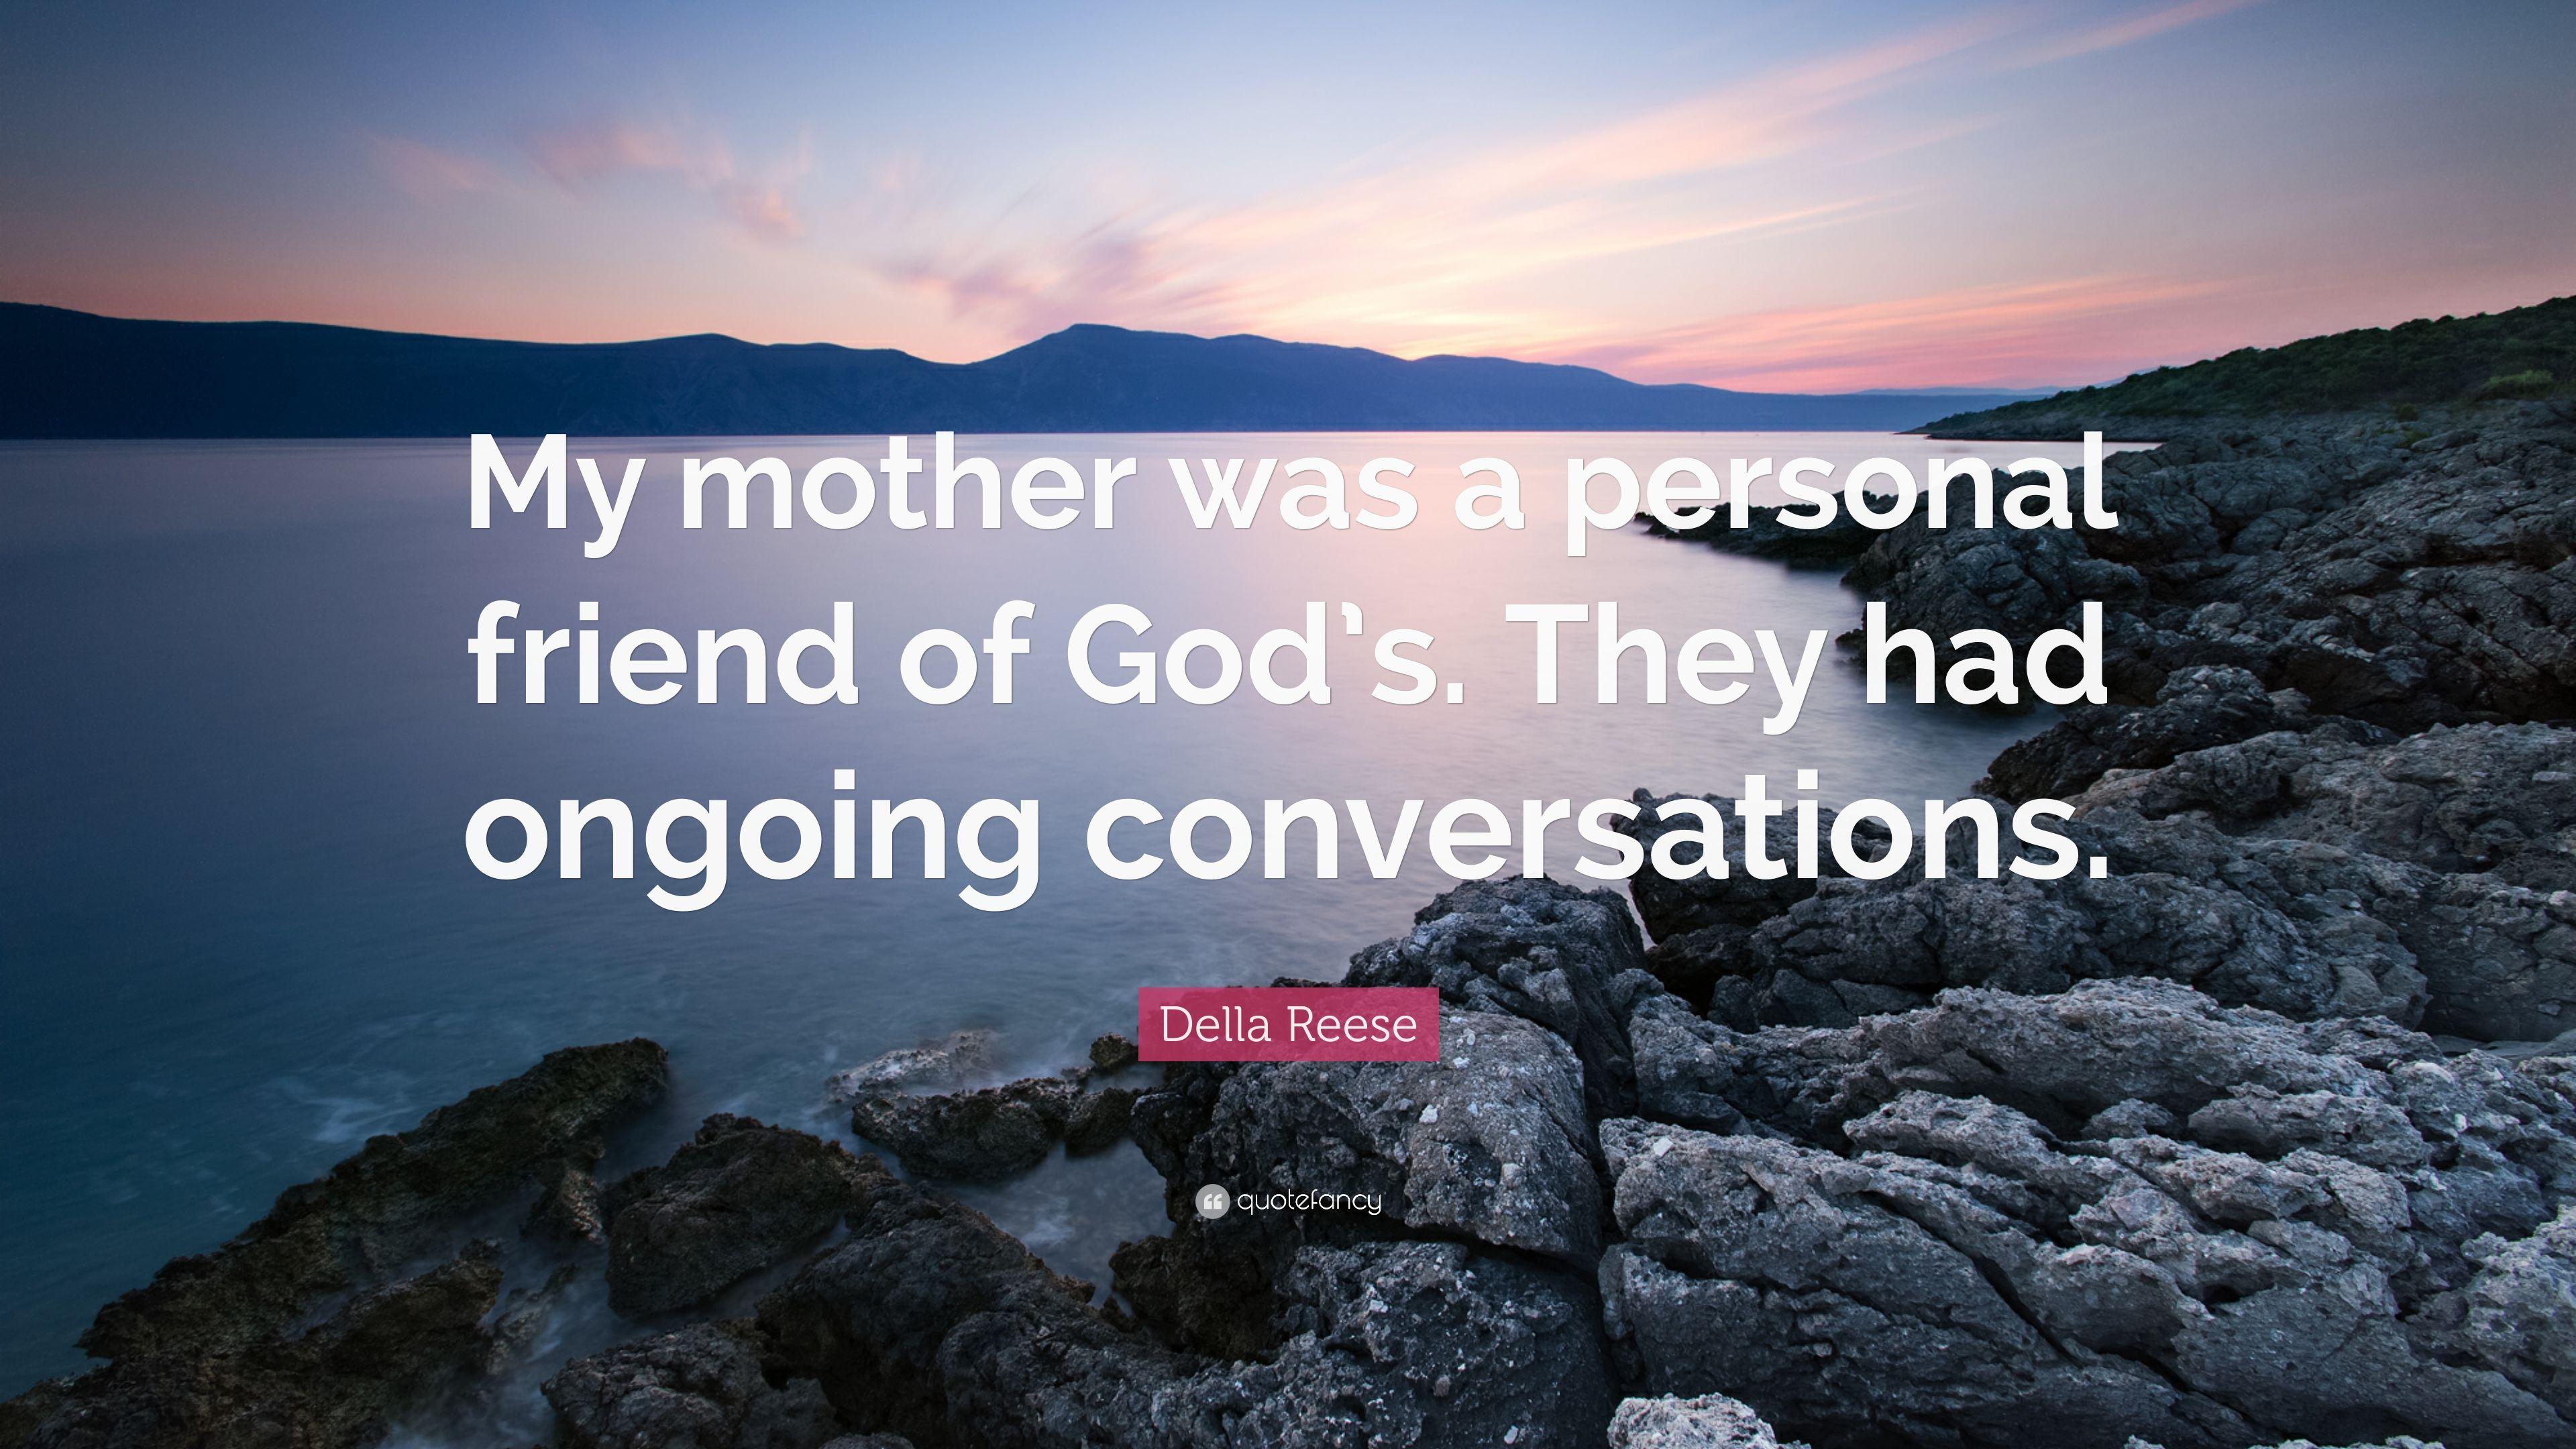 Della Reese Quote: “My mother was a personal friend of God's. They